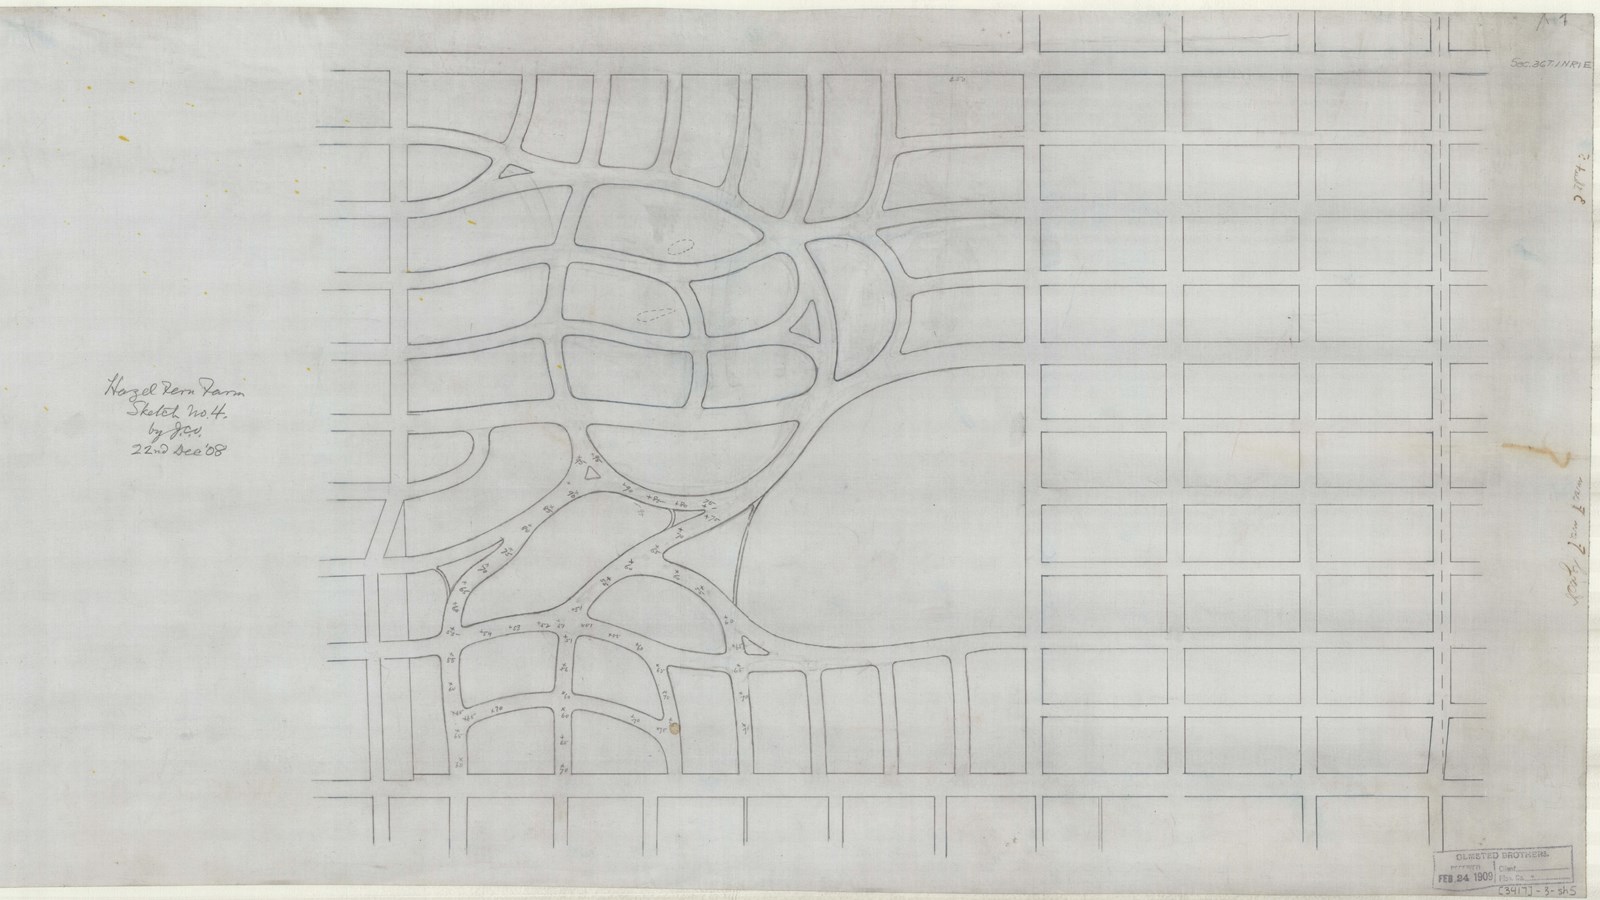 Pencil drawing of curving roads in between a grid of roads